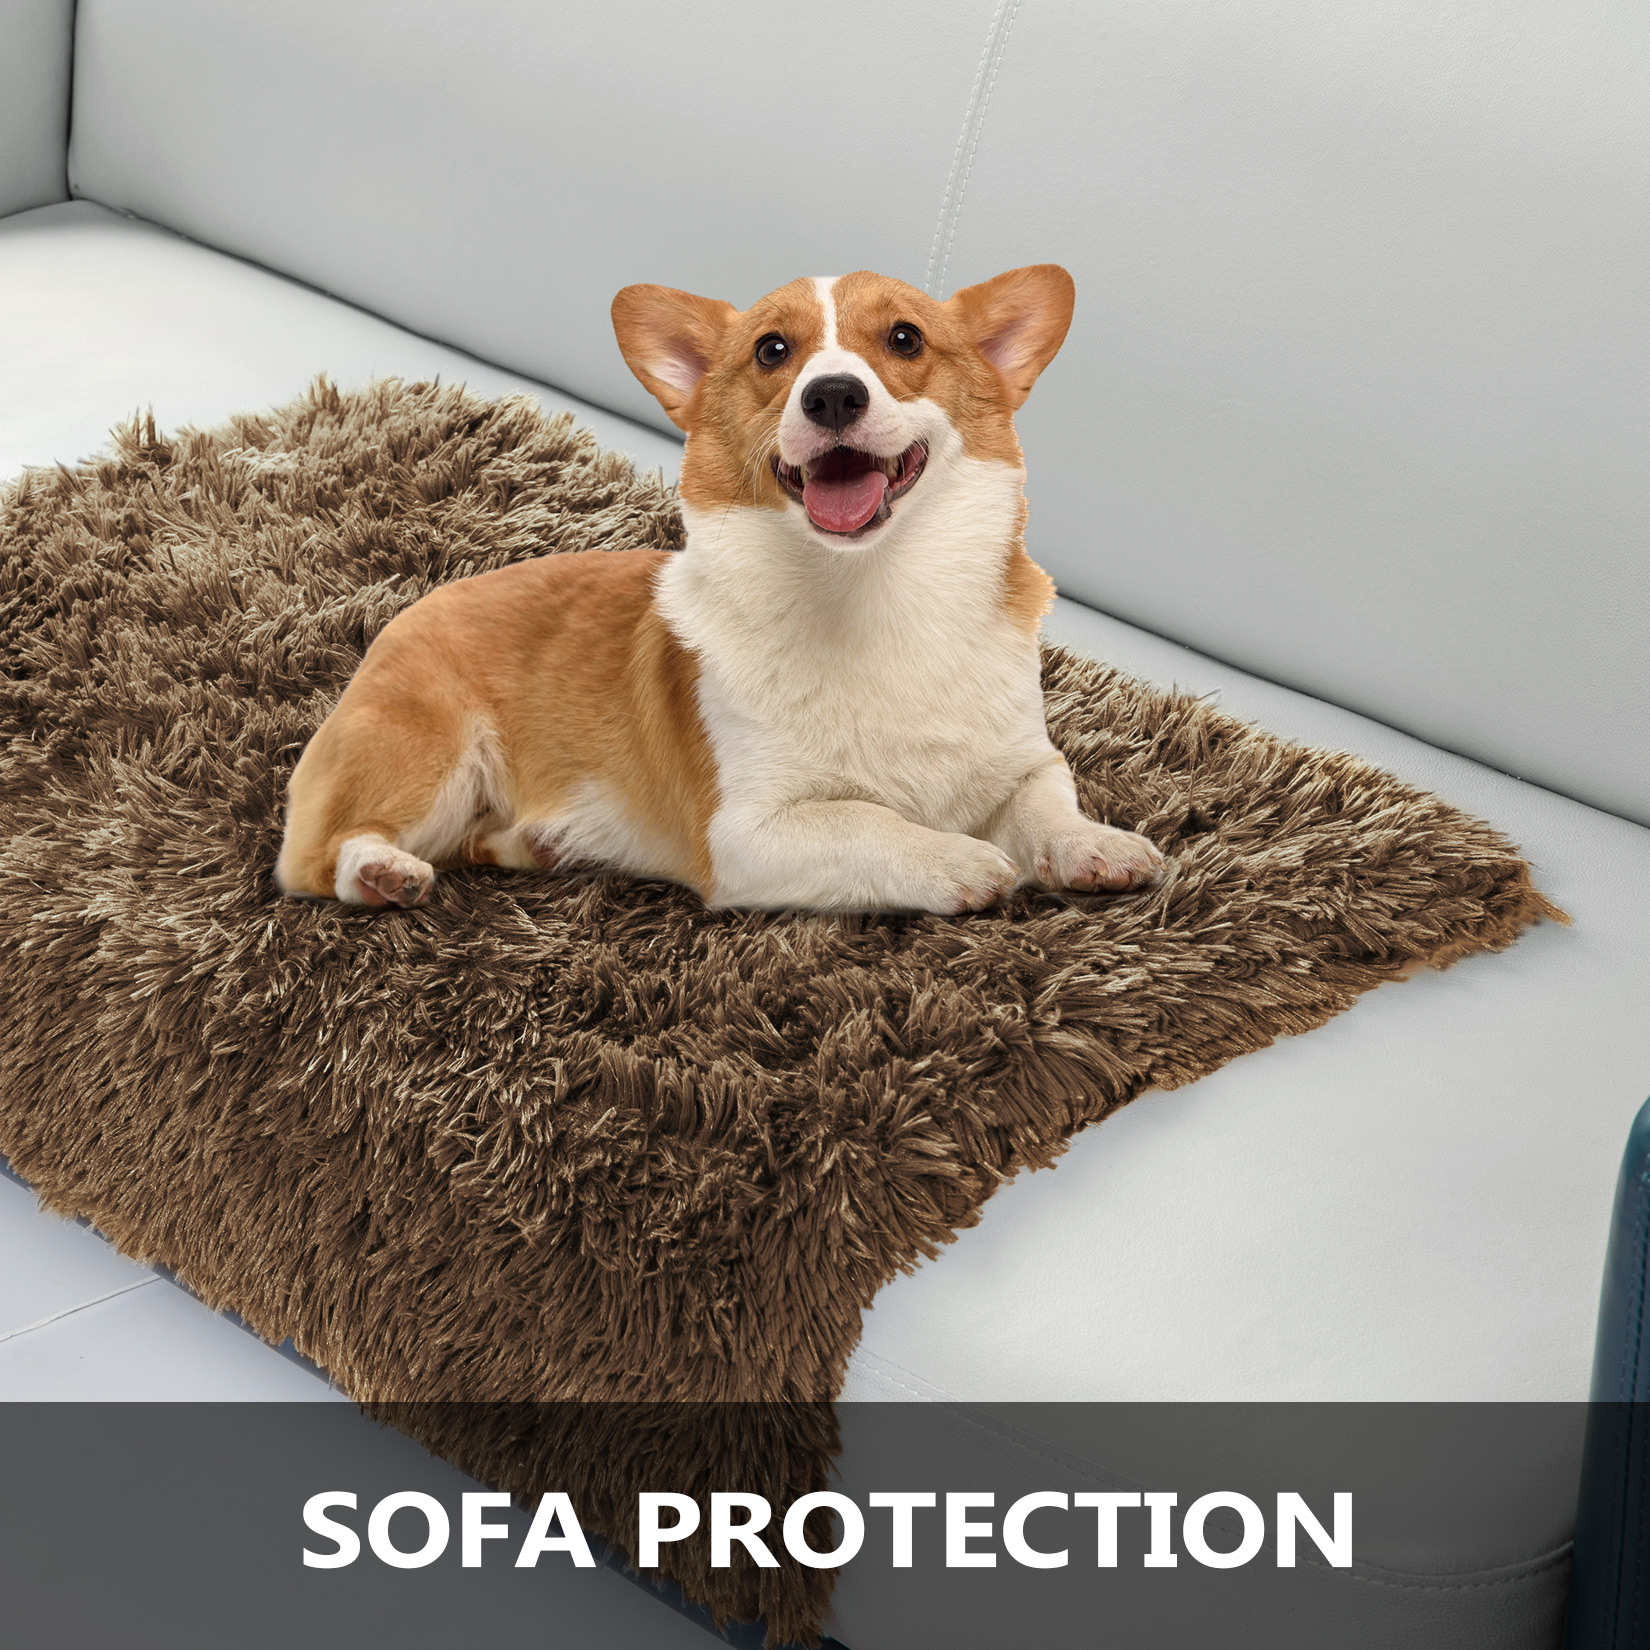 HA-EMORE Waterproof Dog Blanket for Bed Couch Sofa Soft Warm Fluffy Faux Fur Fleece Puppy Blankets Machine Washable Pet Blanket Brown 80×120cm - image 1 of 4